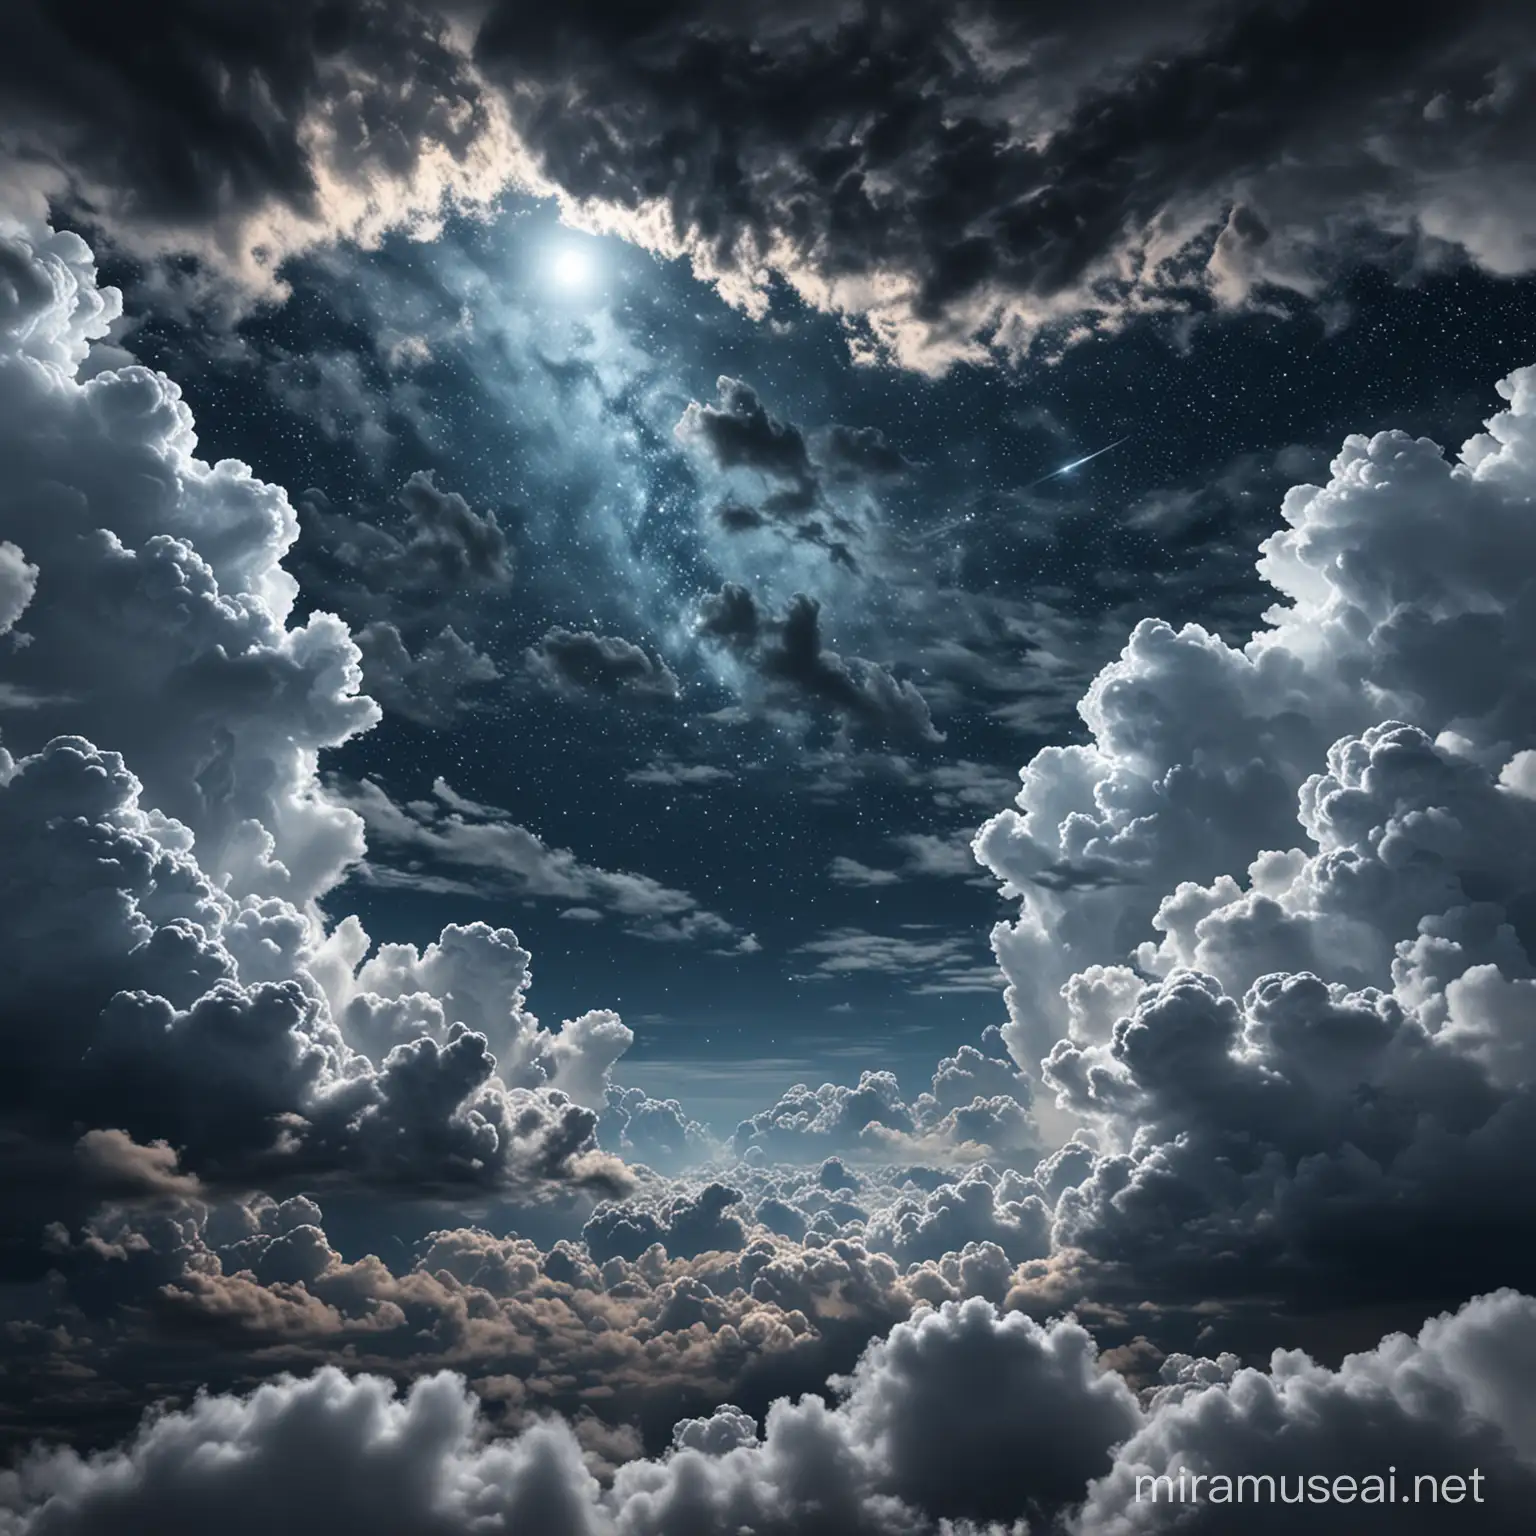 couldy night sky, view in between the clouds, ultra-realistic